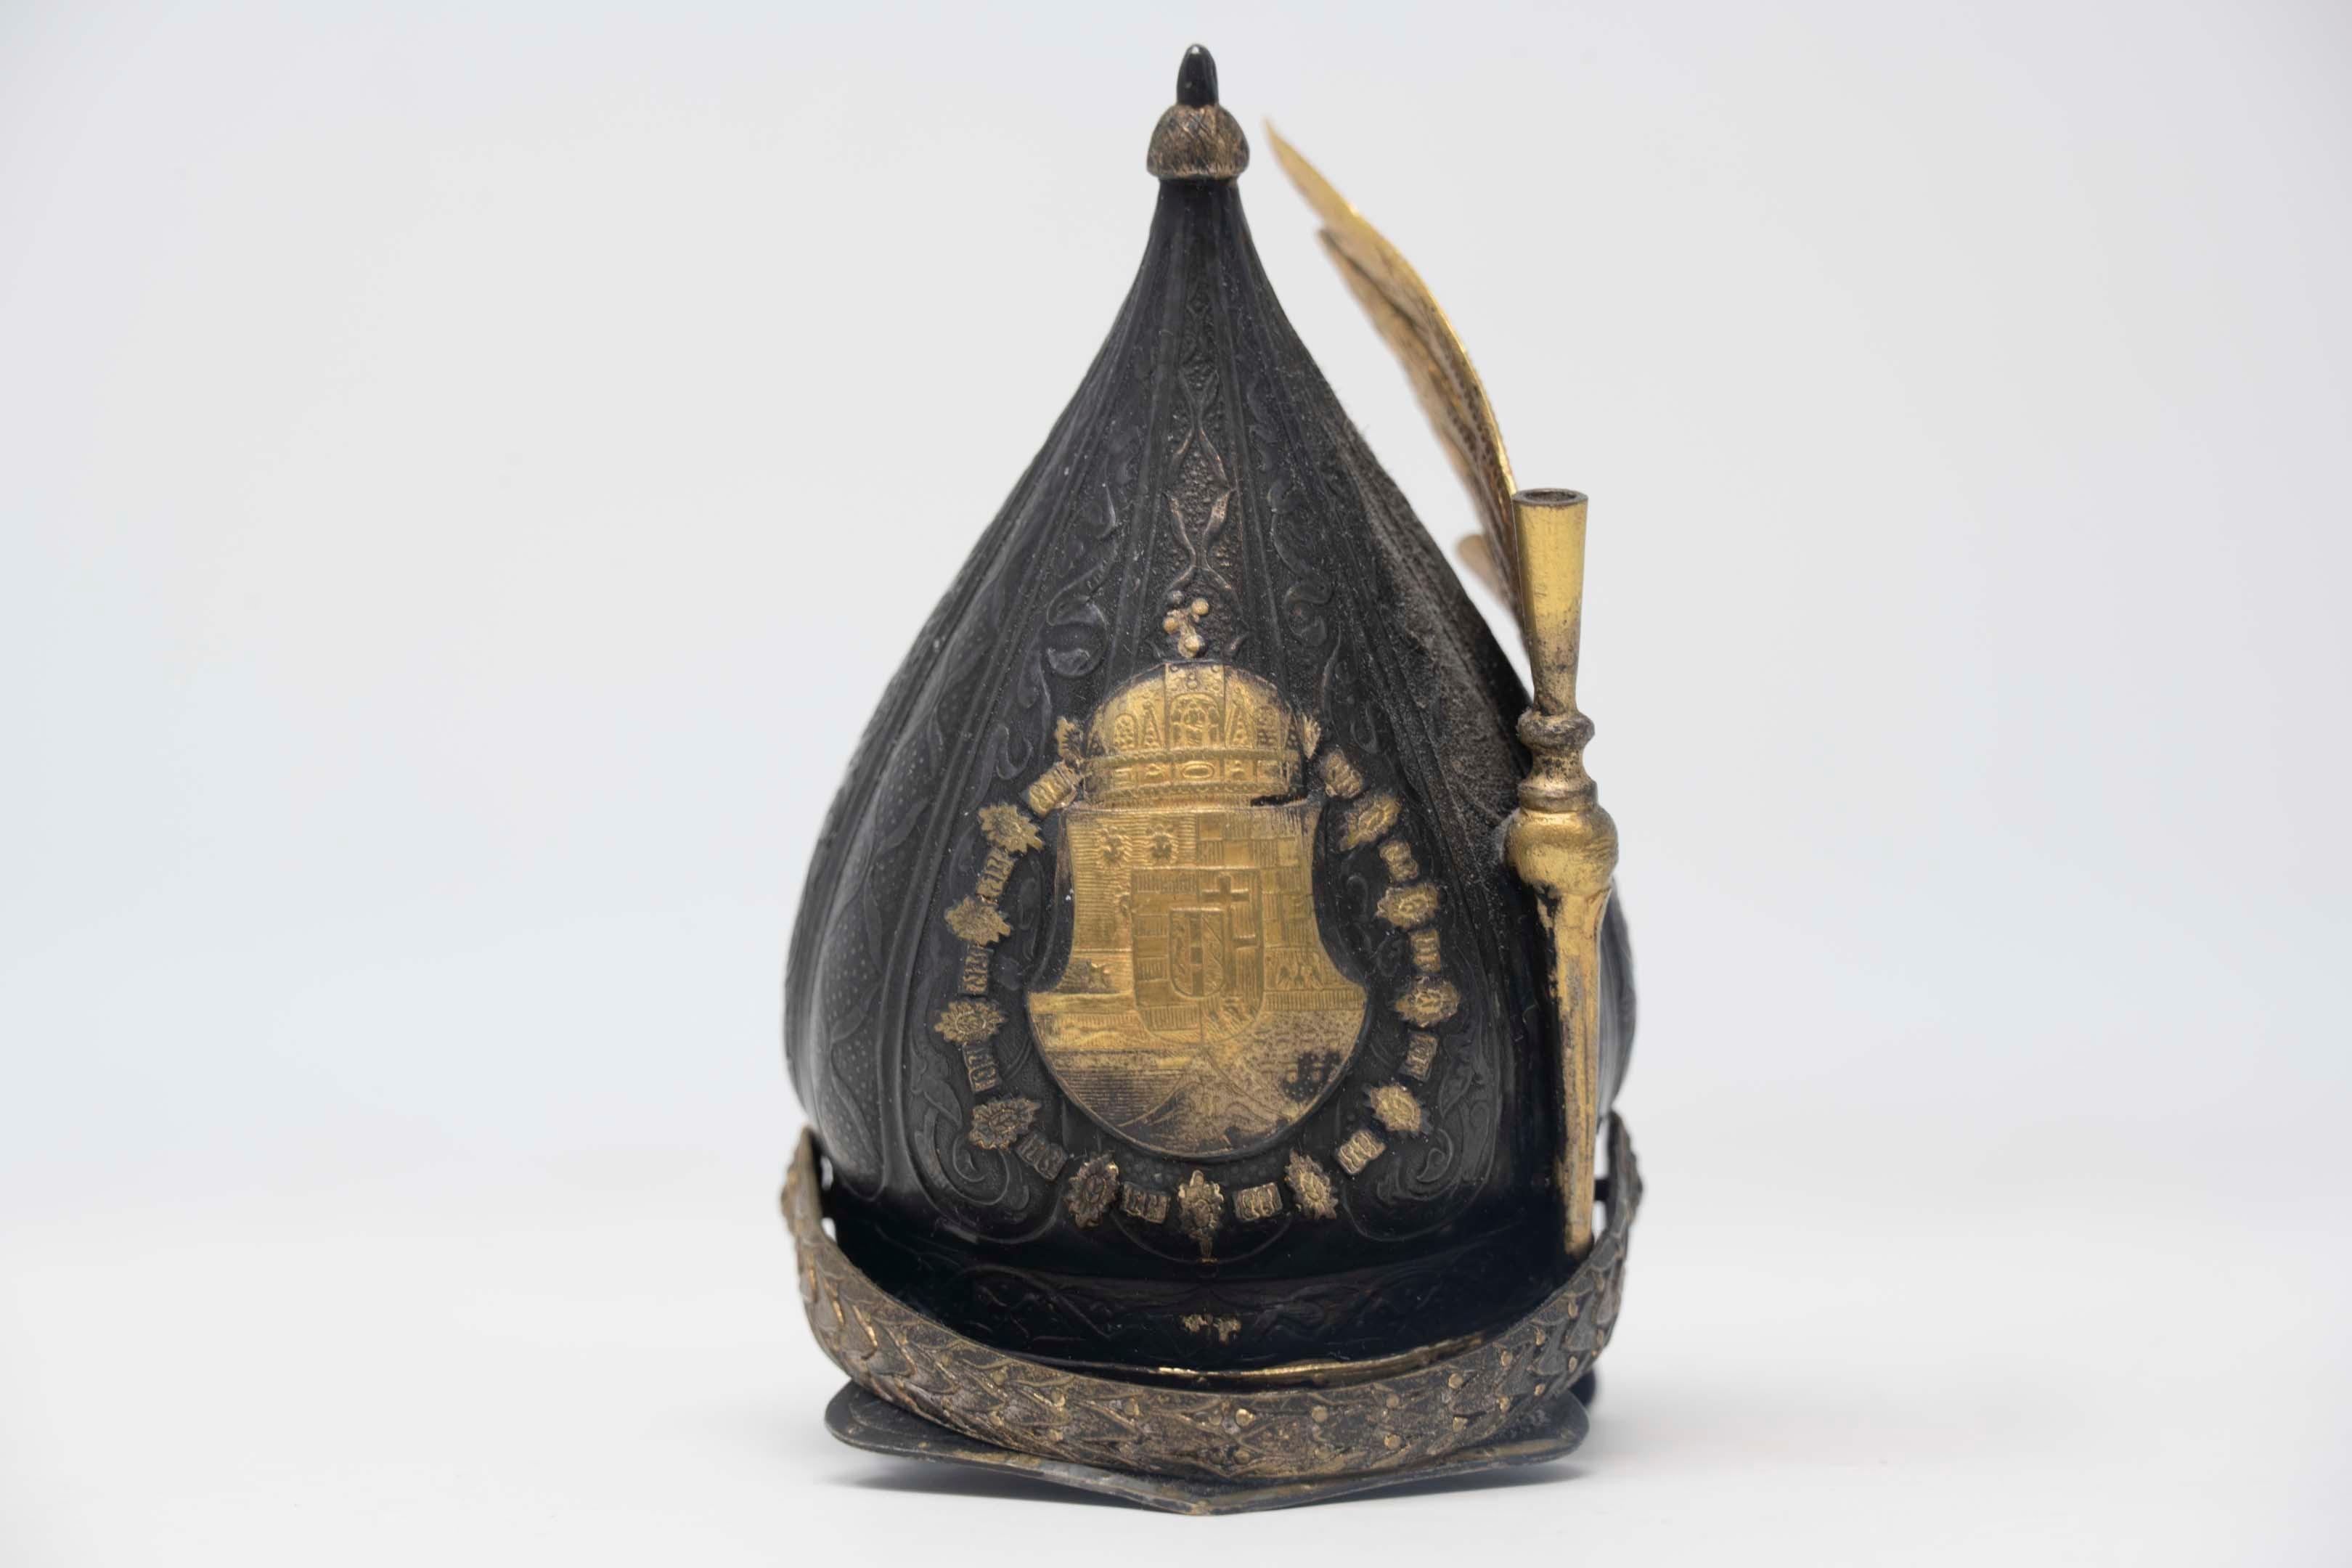 Imperial Austrian court miniature helmet and royal Hungarian crown guard. Maker unknown, silver-plated, parcel gilt. Measures 8cm tall, circa 1900. In good condition.
